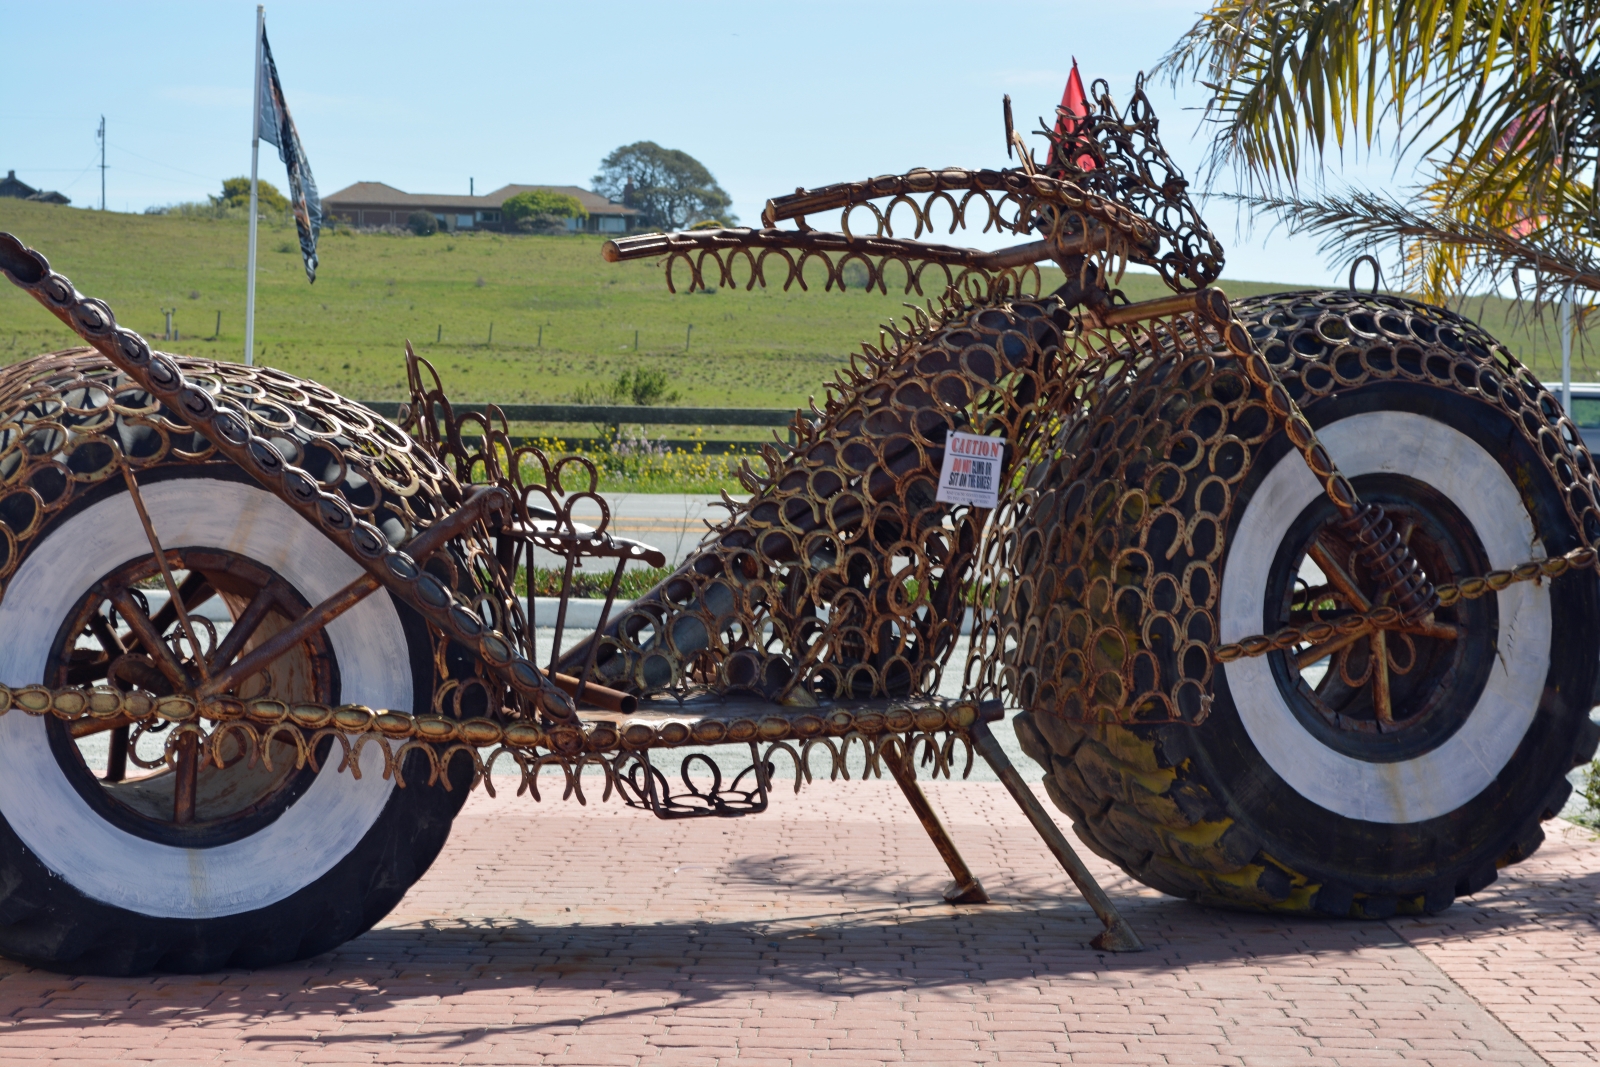 Motorcycle sculpture made from horseshoes